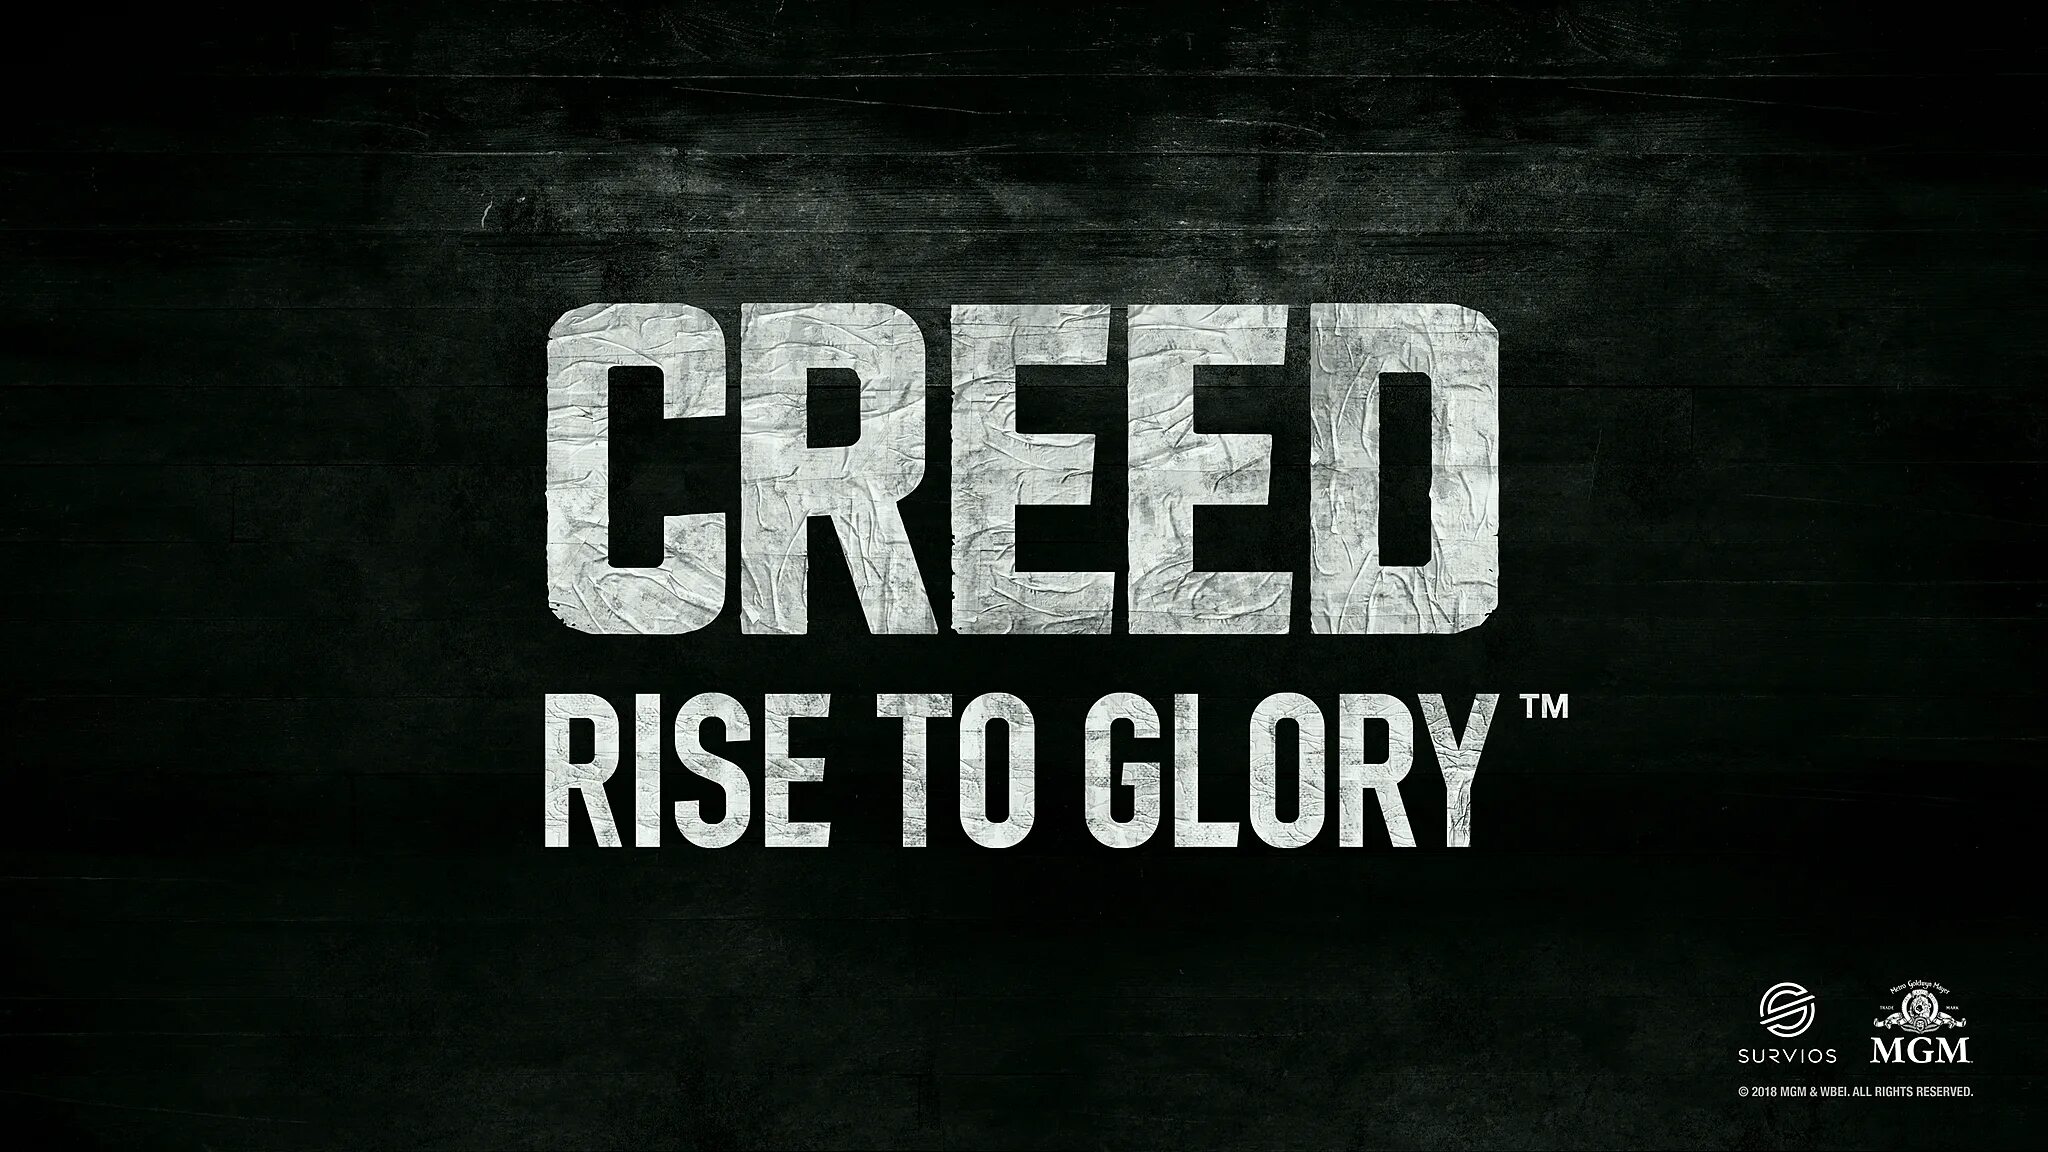 Creed glory vr. Creed Rise to Glory. Creed: Rise to Glory (2018). Creed VR игра. Creed Rise to Glory VR poster.